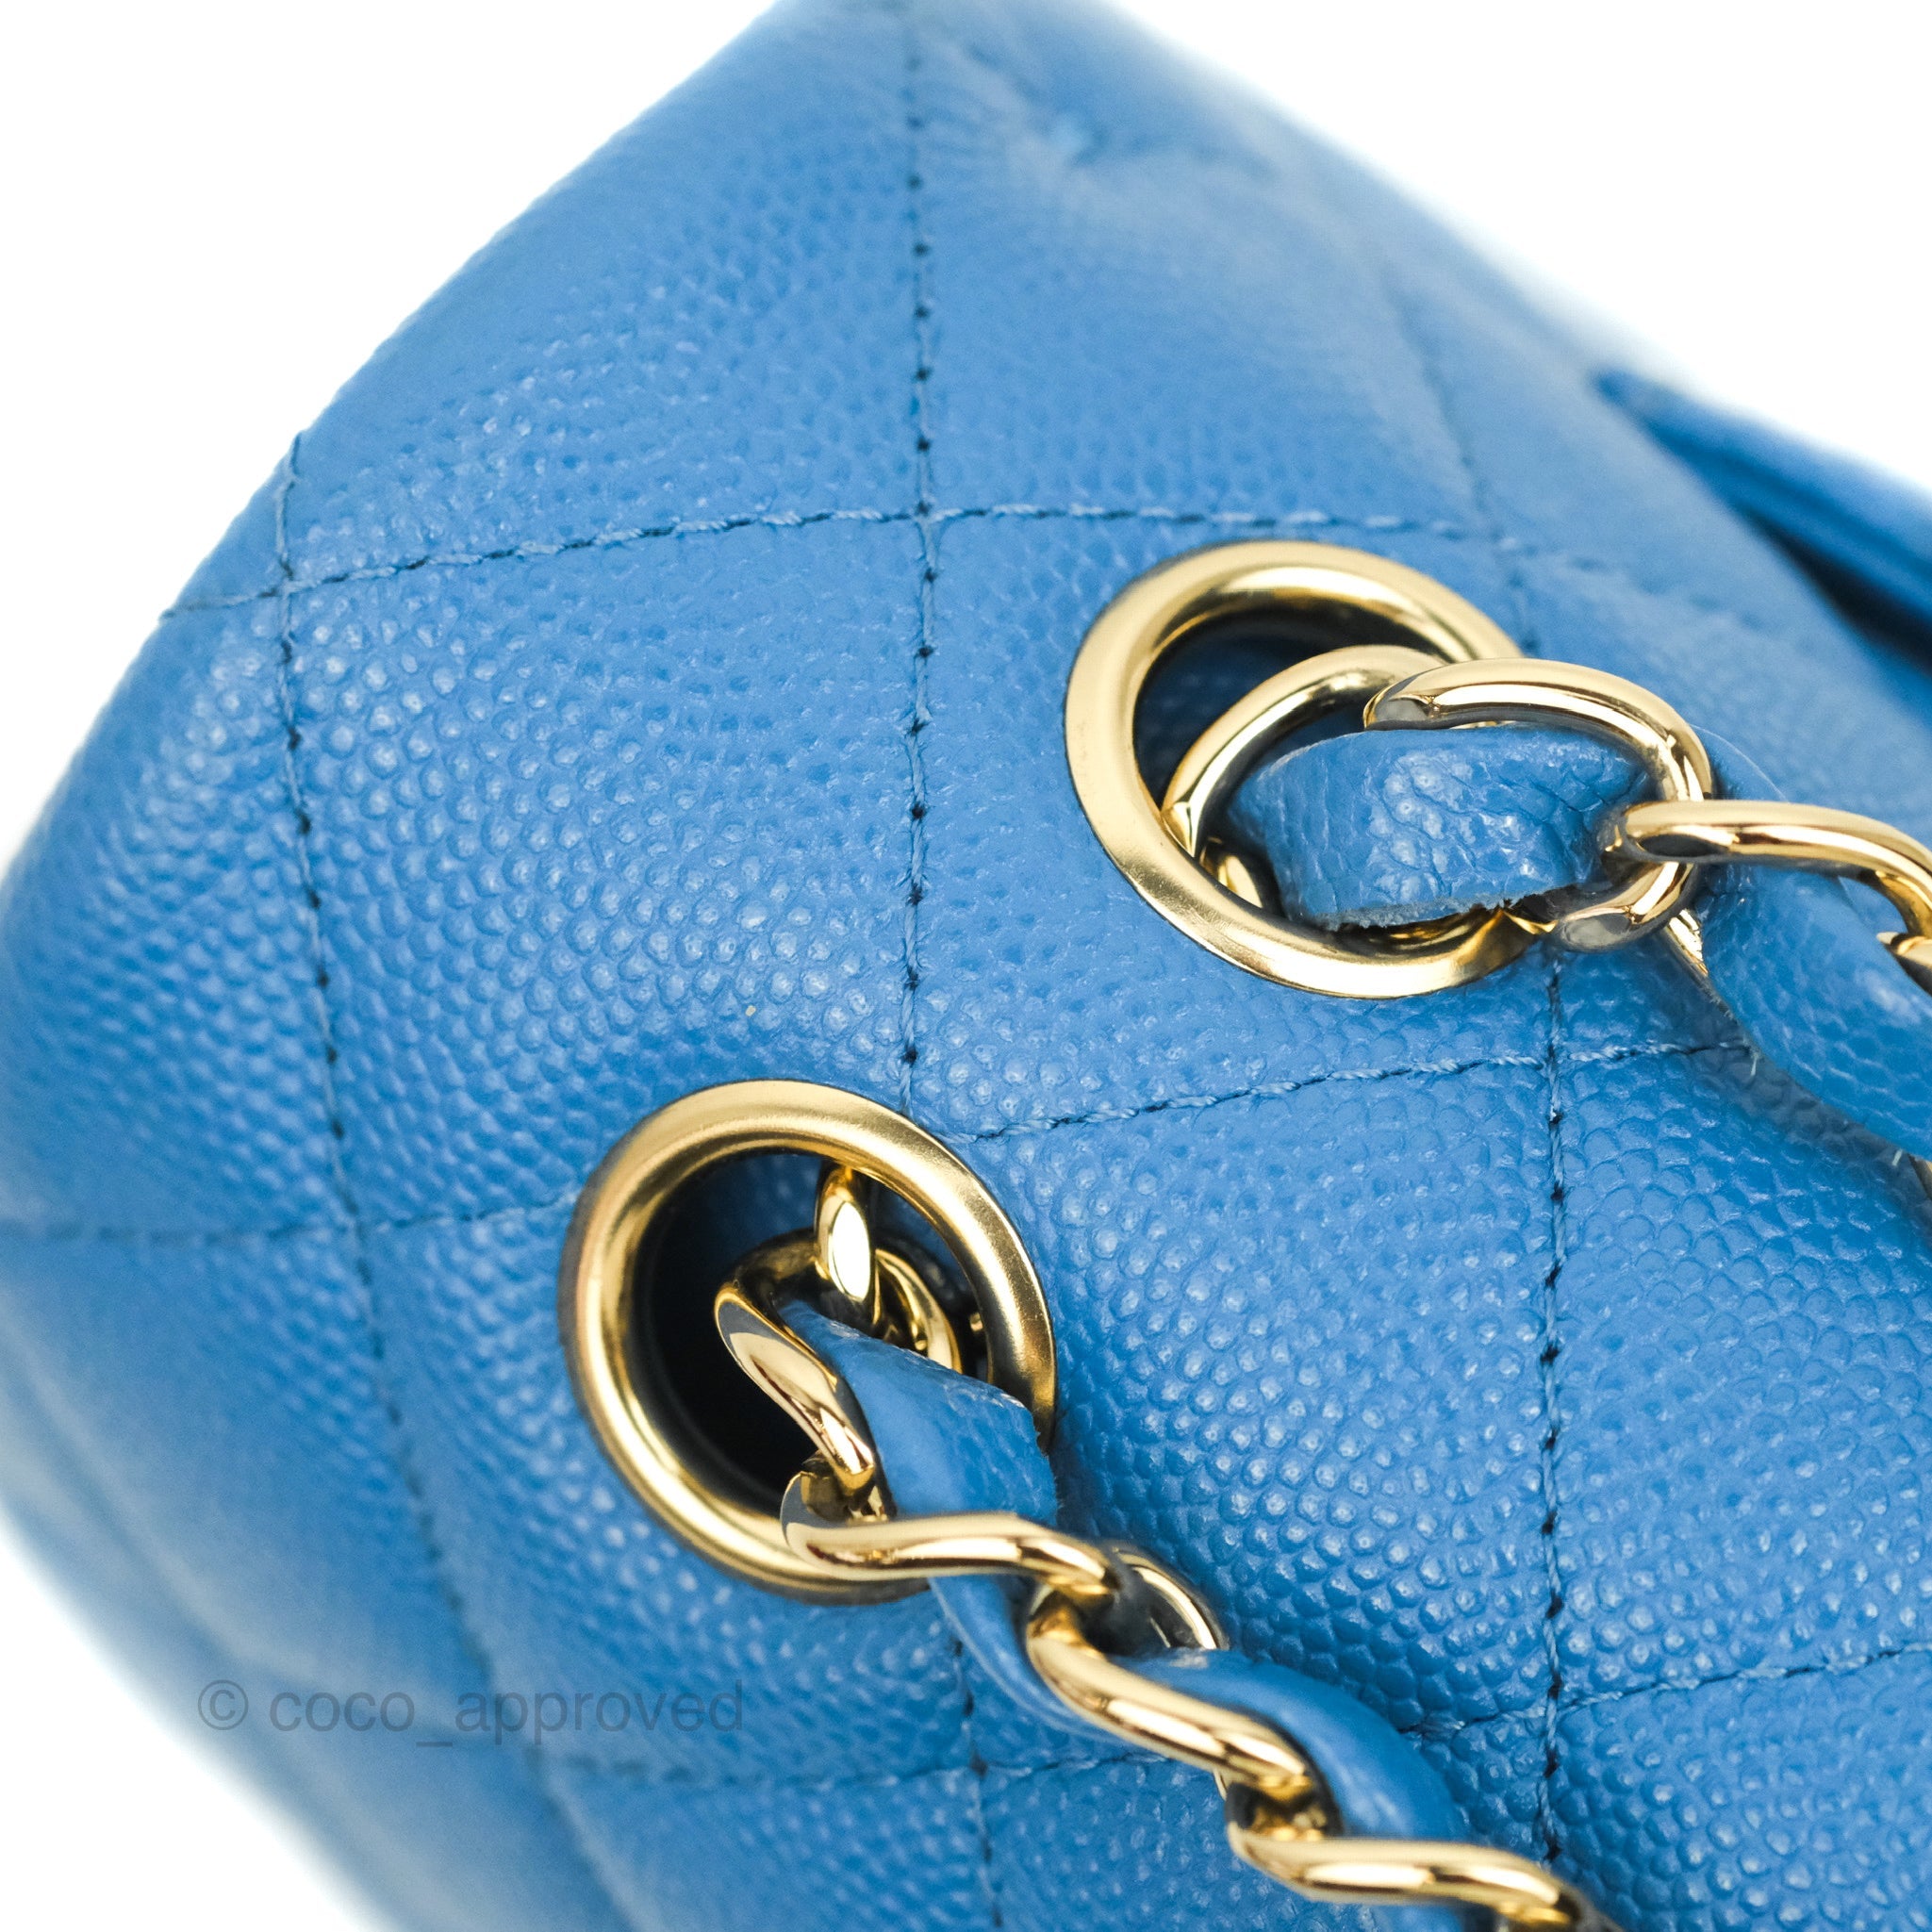 Chanel Sunset by the Sea Bag, Blue Ombre Caviar with Gold Hardware, Mini,  Preowned in Dustbag GA002 - Julia Rose Boston